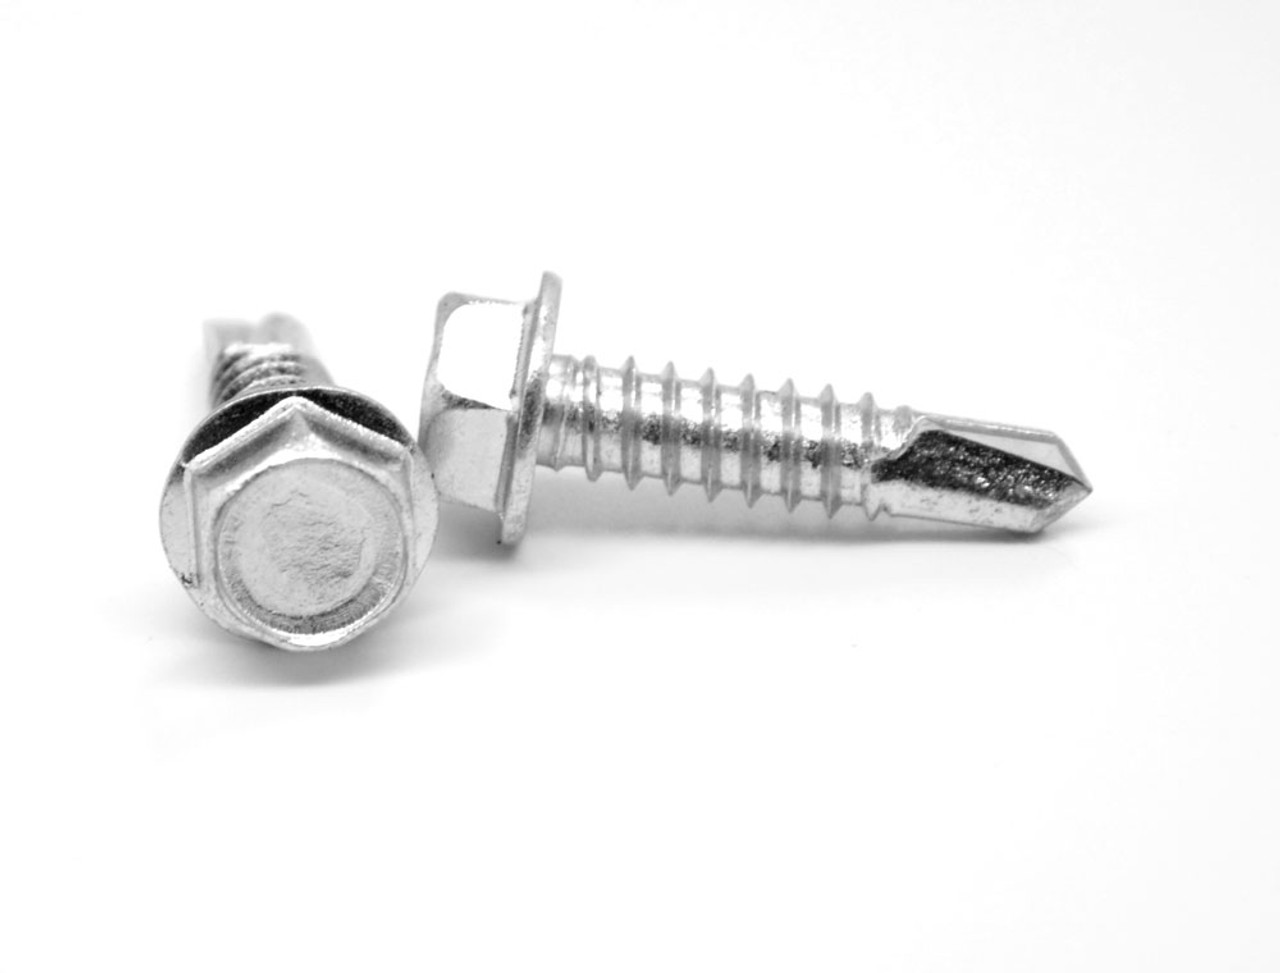 #12-24 x 1/2" (FT) Coarse Thread Self Drilling Screw Hex Washer Head #2 Point Stainless Steel 18-8